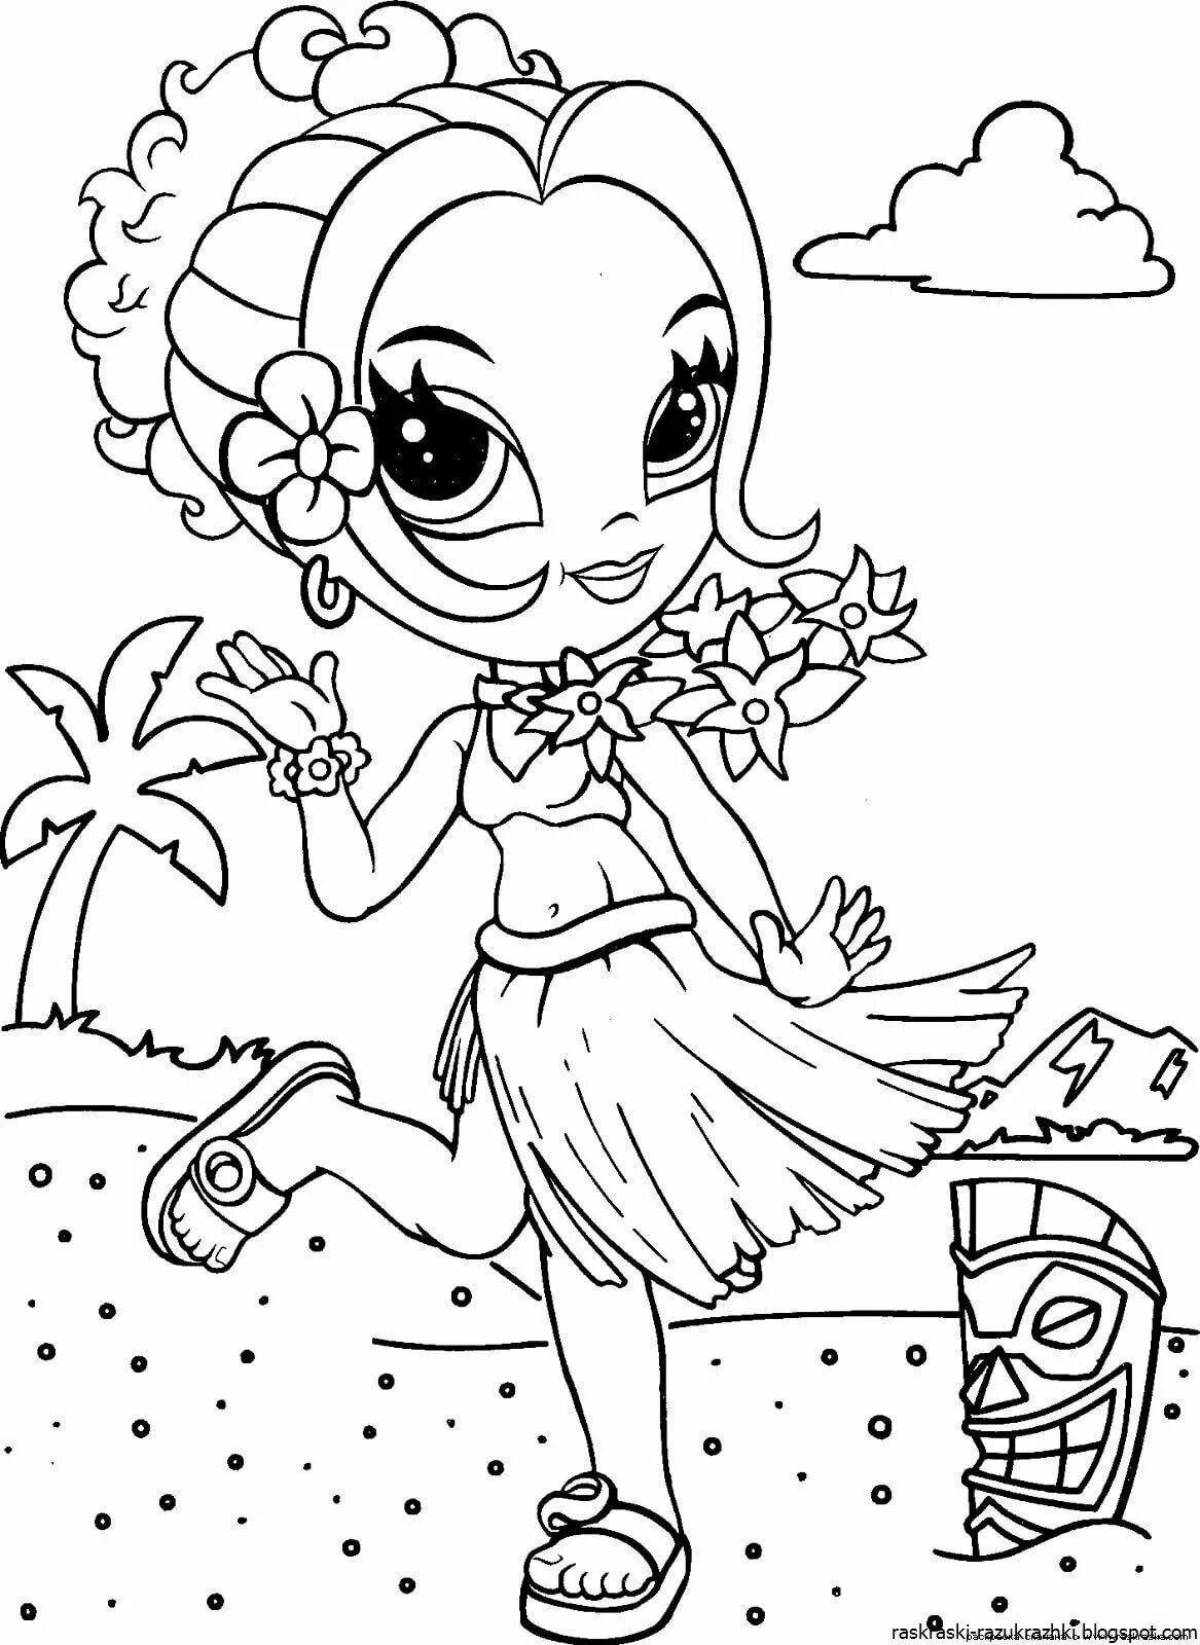 Adorable coloring book for girls 8-9 years old